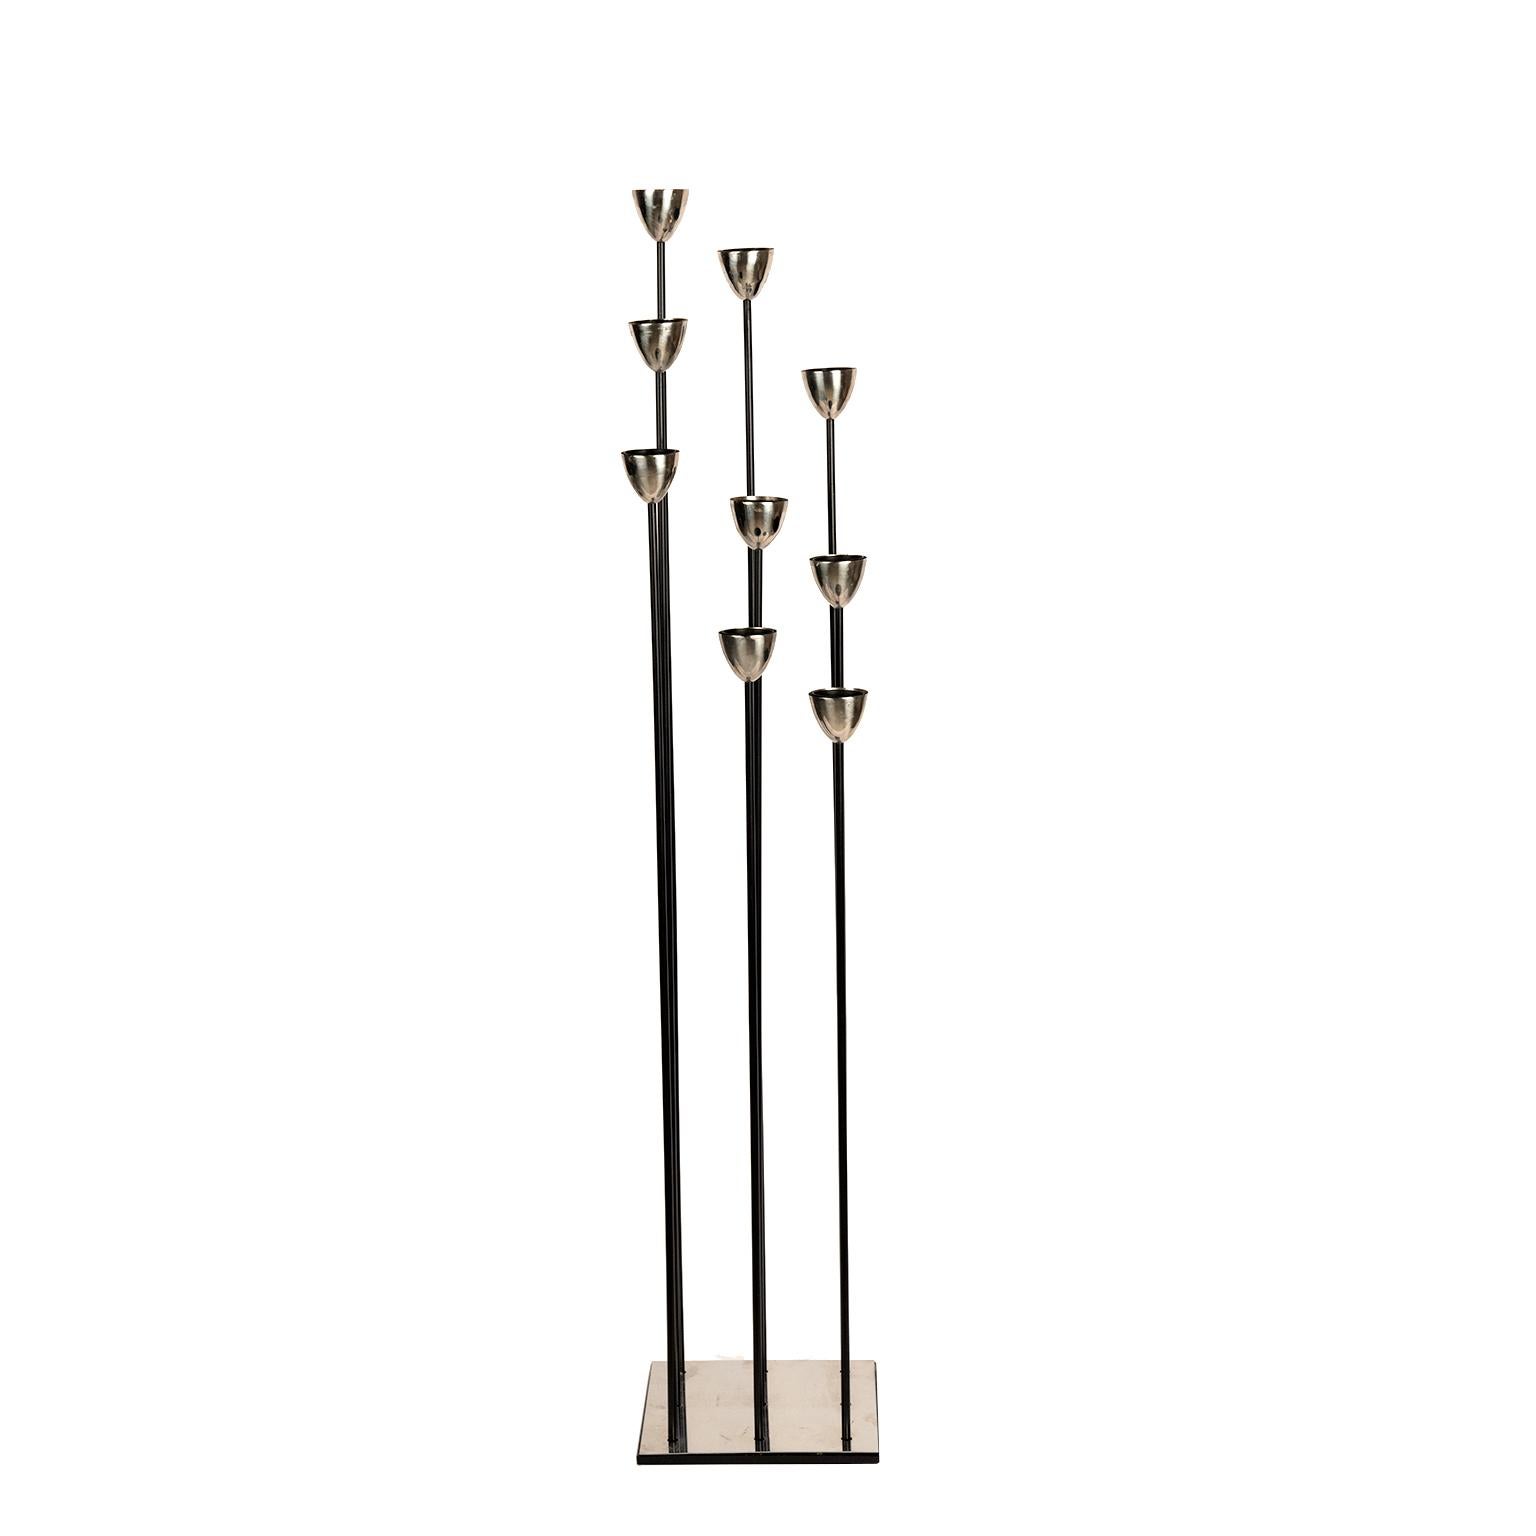 This unique tall eight light candelabra is as made of polished steel and black painted metal. It may sit on the floor or put it on a plinth and it becomes a piece of art/sculpture reminiscent of the brutalist sculptures of Harry Bertoia